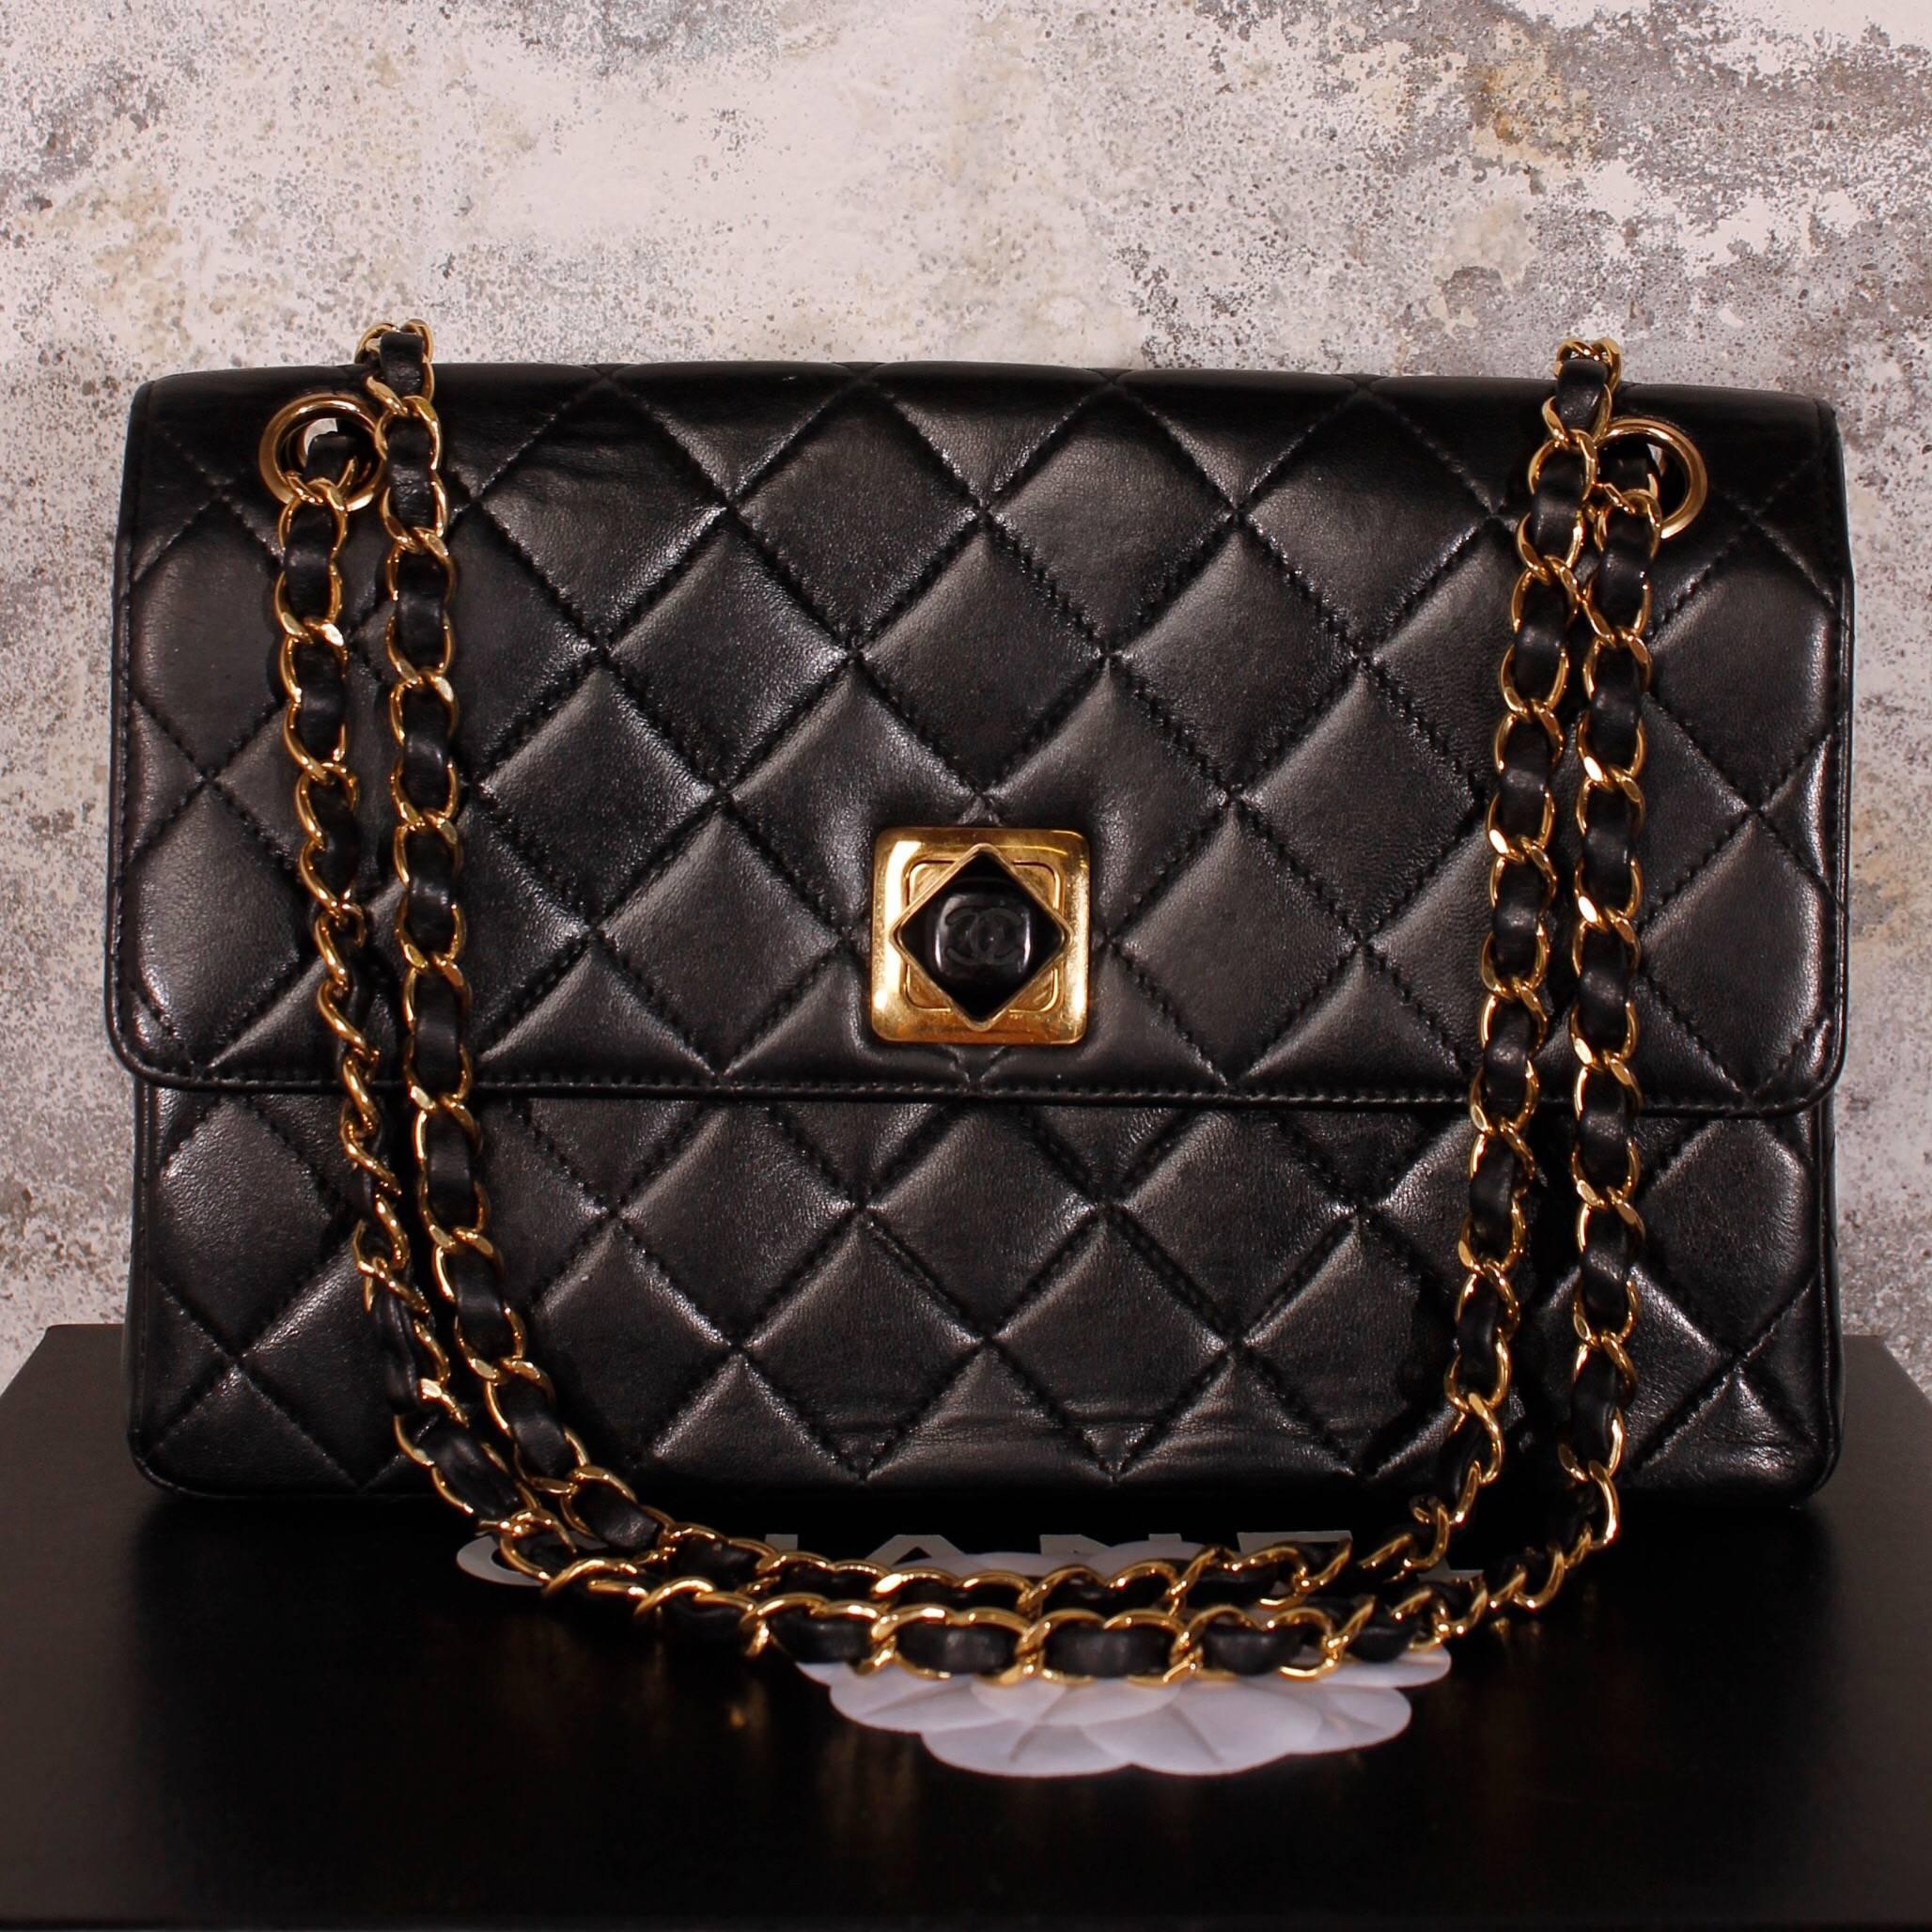 This one is very very special! A 1997 limited Chanel 2.55 Bag with a very rare closure and single flap. A really nice bag, we must say!

In excellent condition, the soft lambskin leather is free of damages and intensely black. Golden hardware: